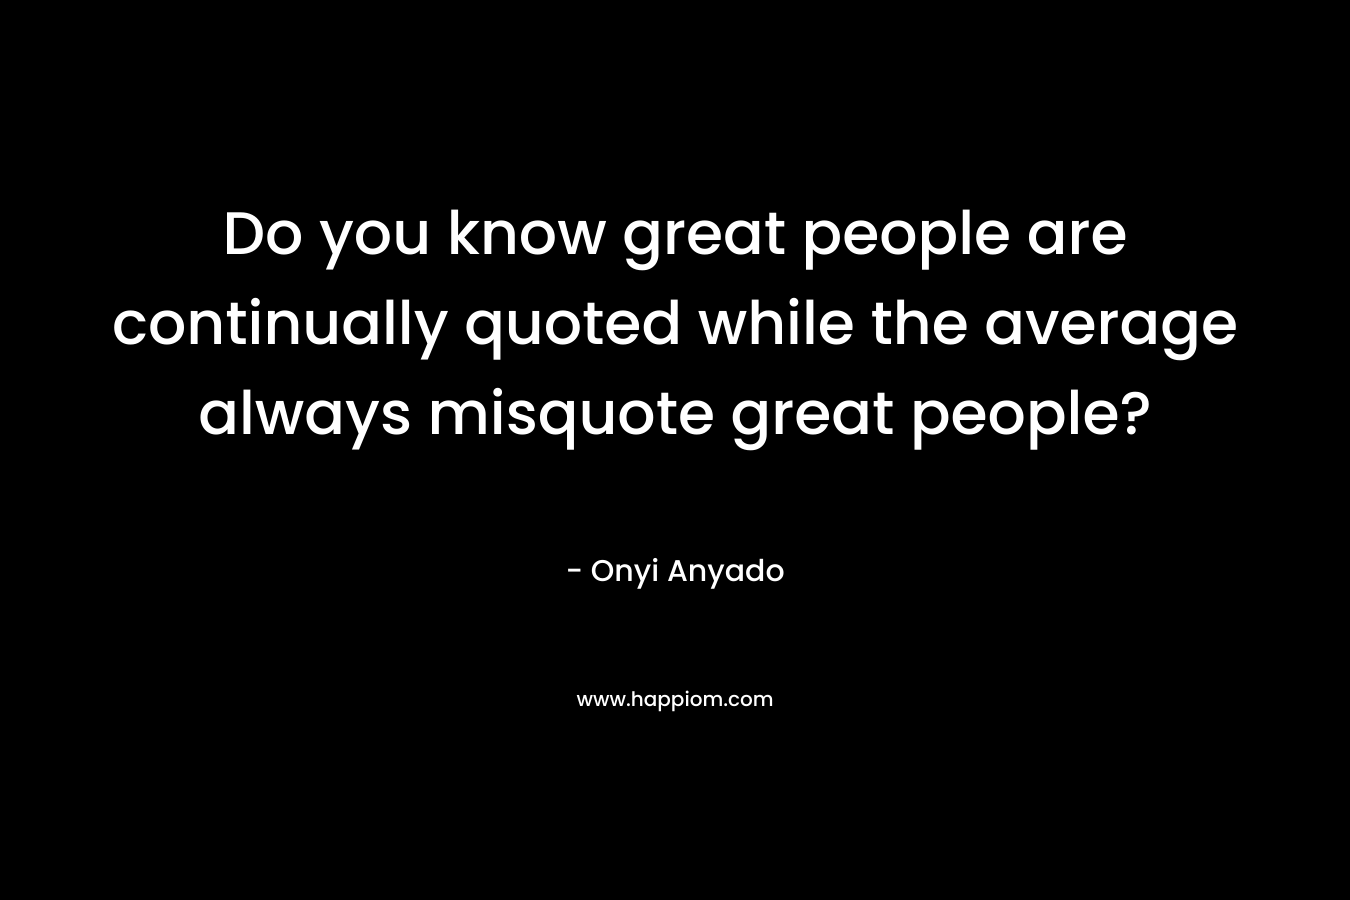 Do you know great people are continually quoted while the average always misquote great people?